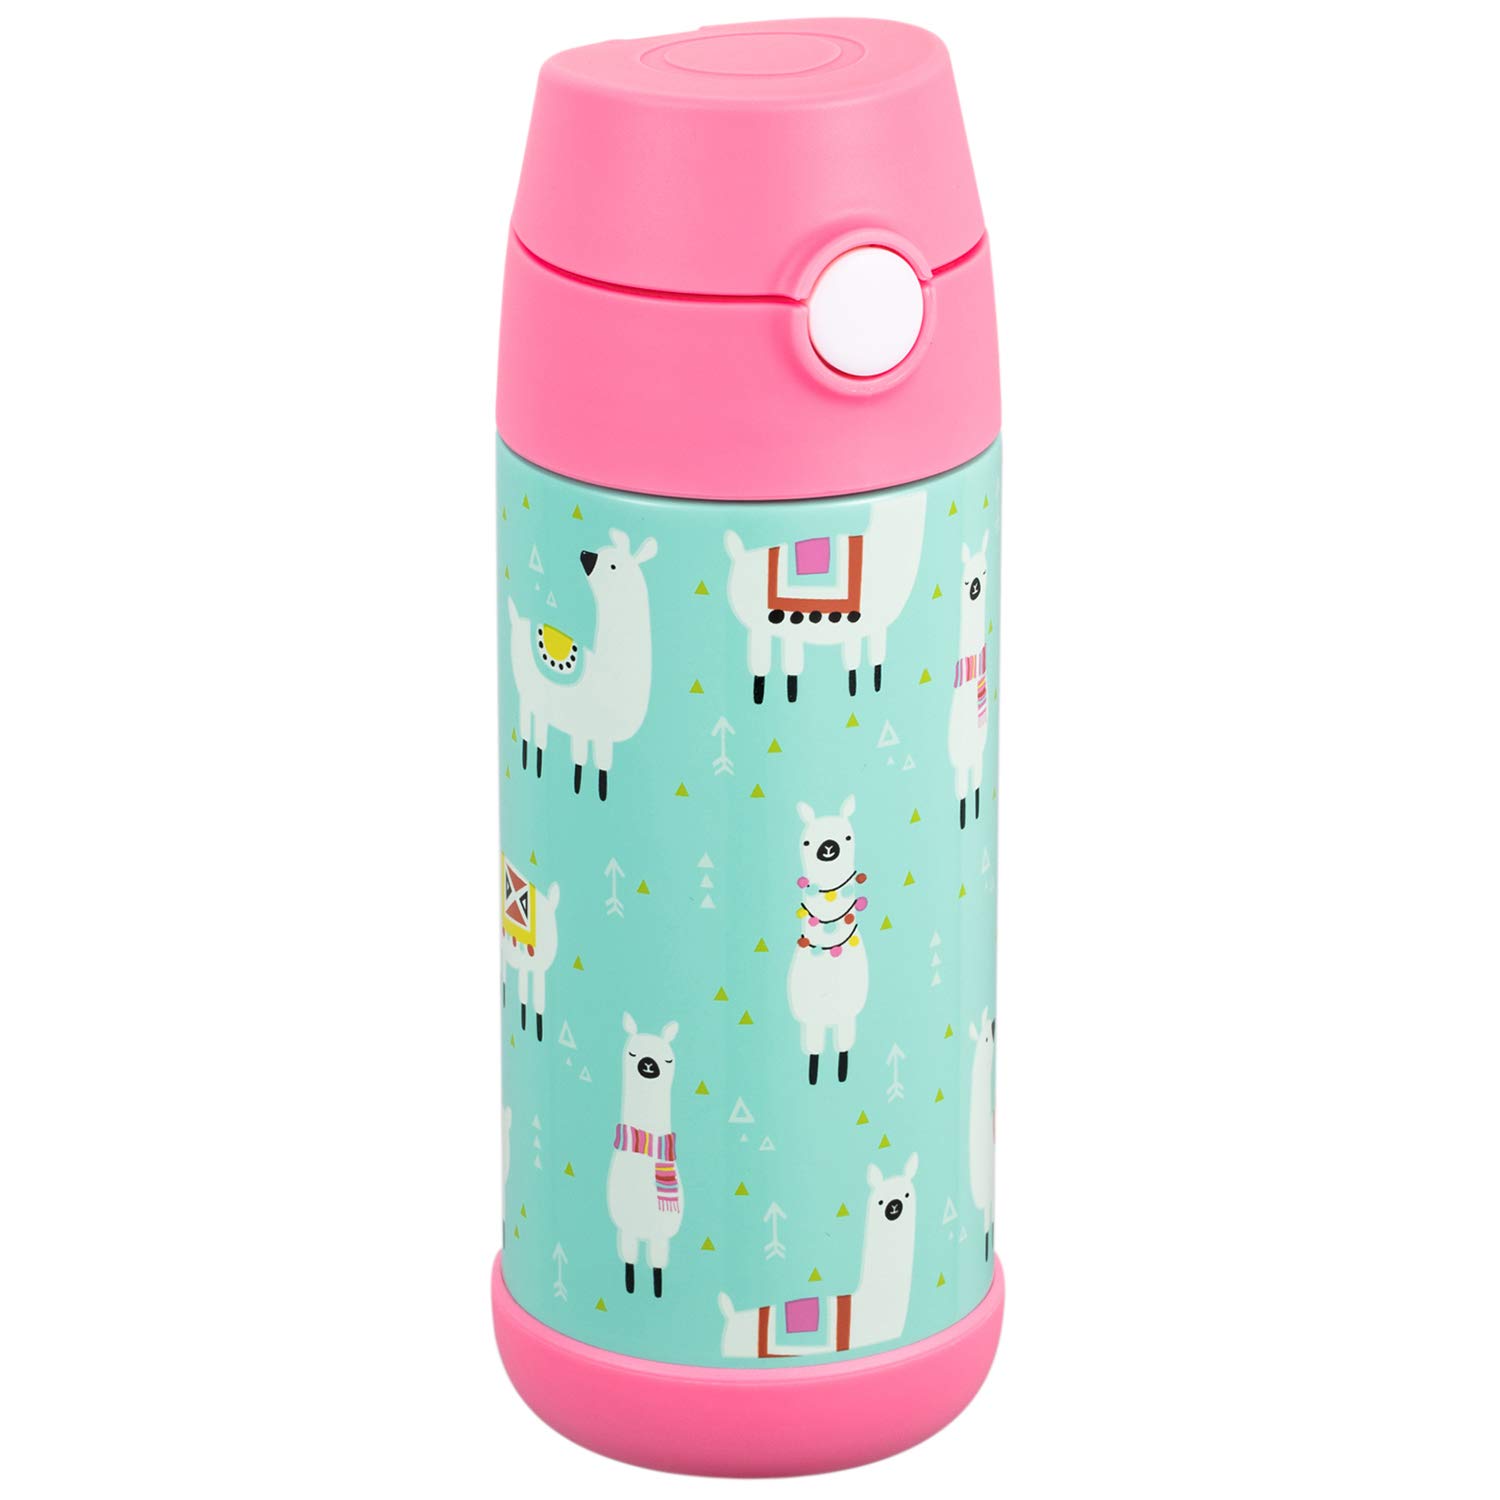 Snug Kids Water Bottle - insulated stainless steel thermos with straw (Girls/Boys) - Llamas, 12oz